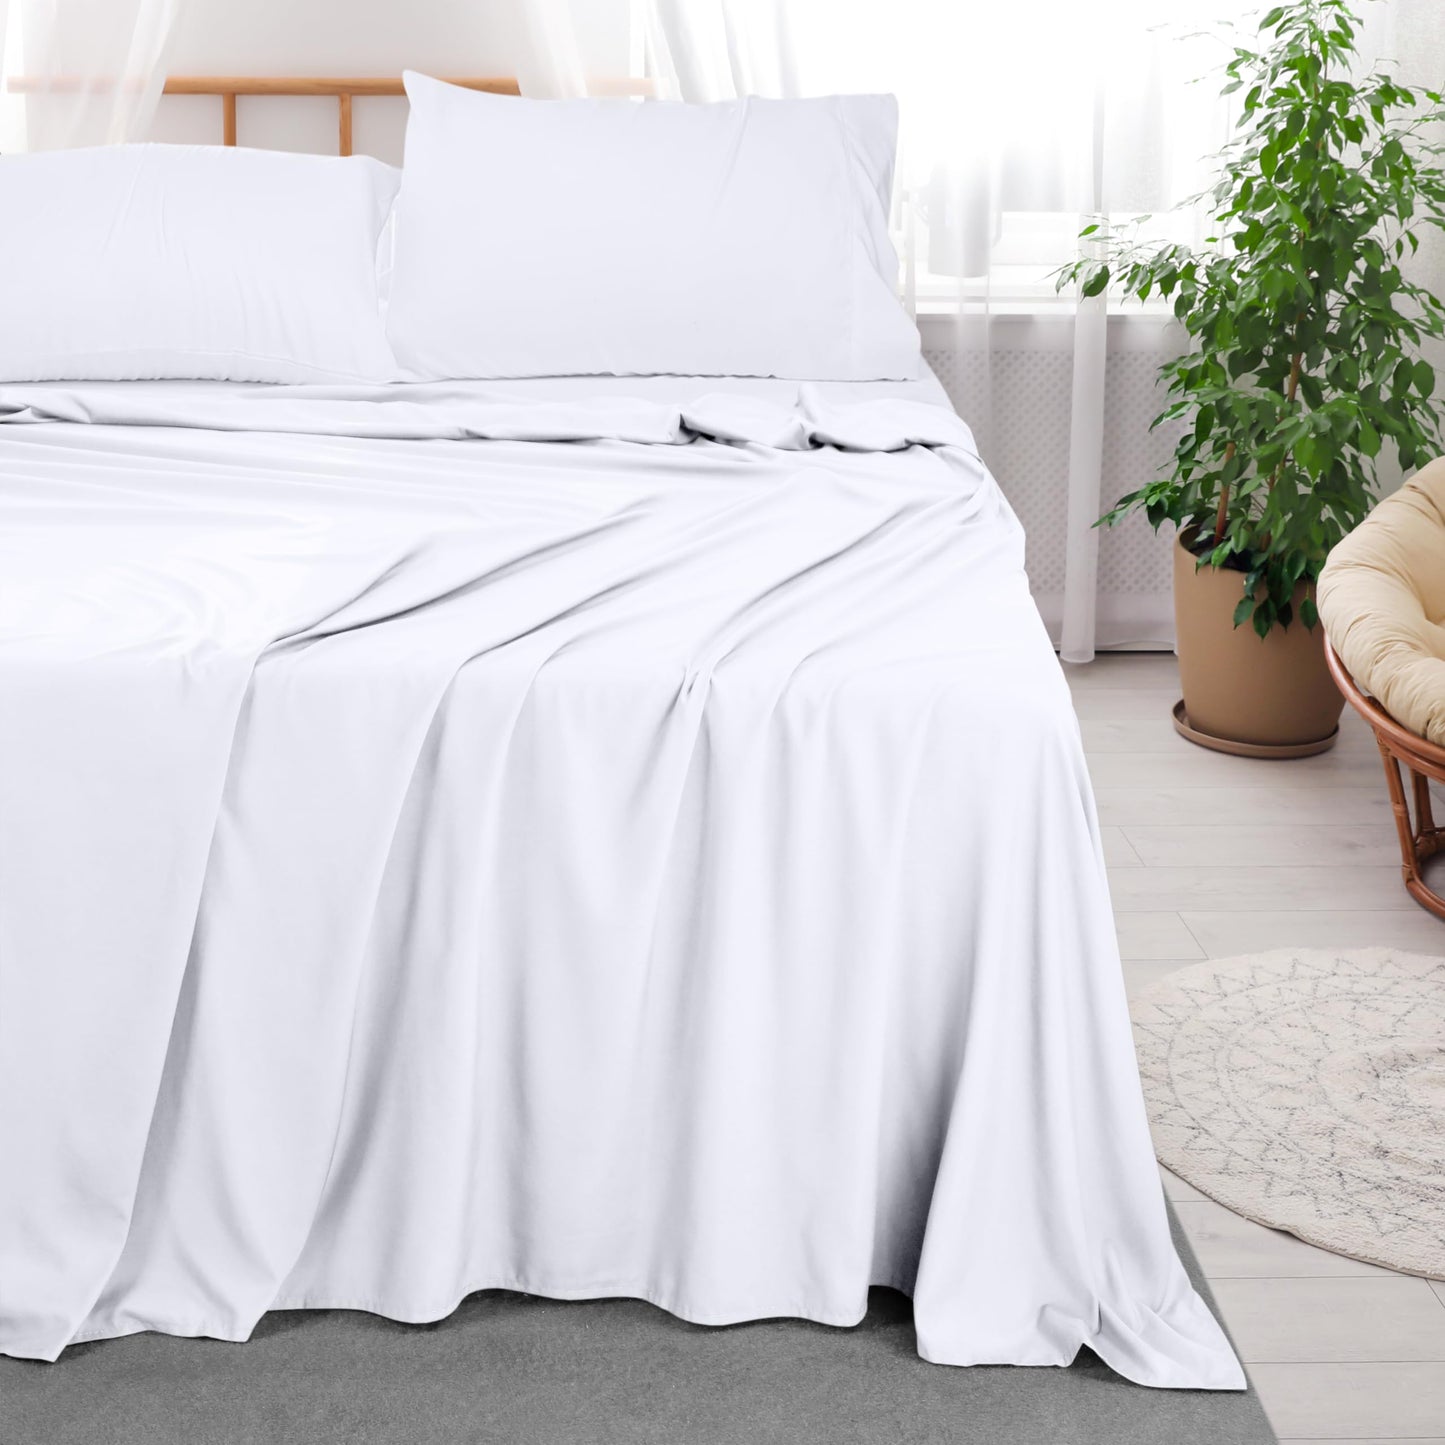 Utopia Bedding Flat Sheet - Soft Brushed Microfiber Fabric - Shrinkage & Fade Resistant Top Sheet - Easy Care - 1 Flat Sheet Only (Full, White)